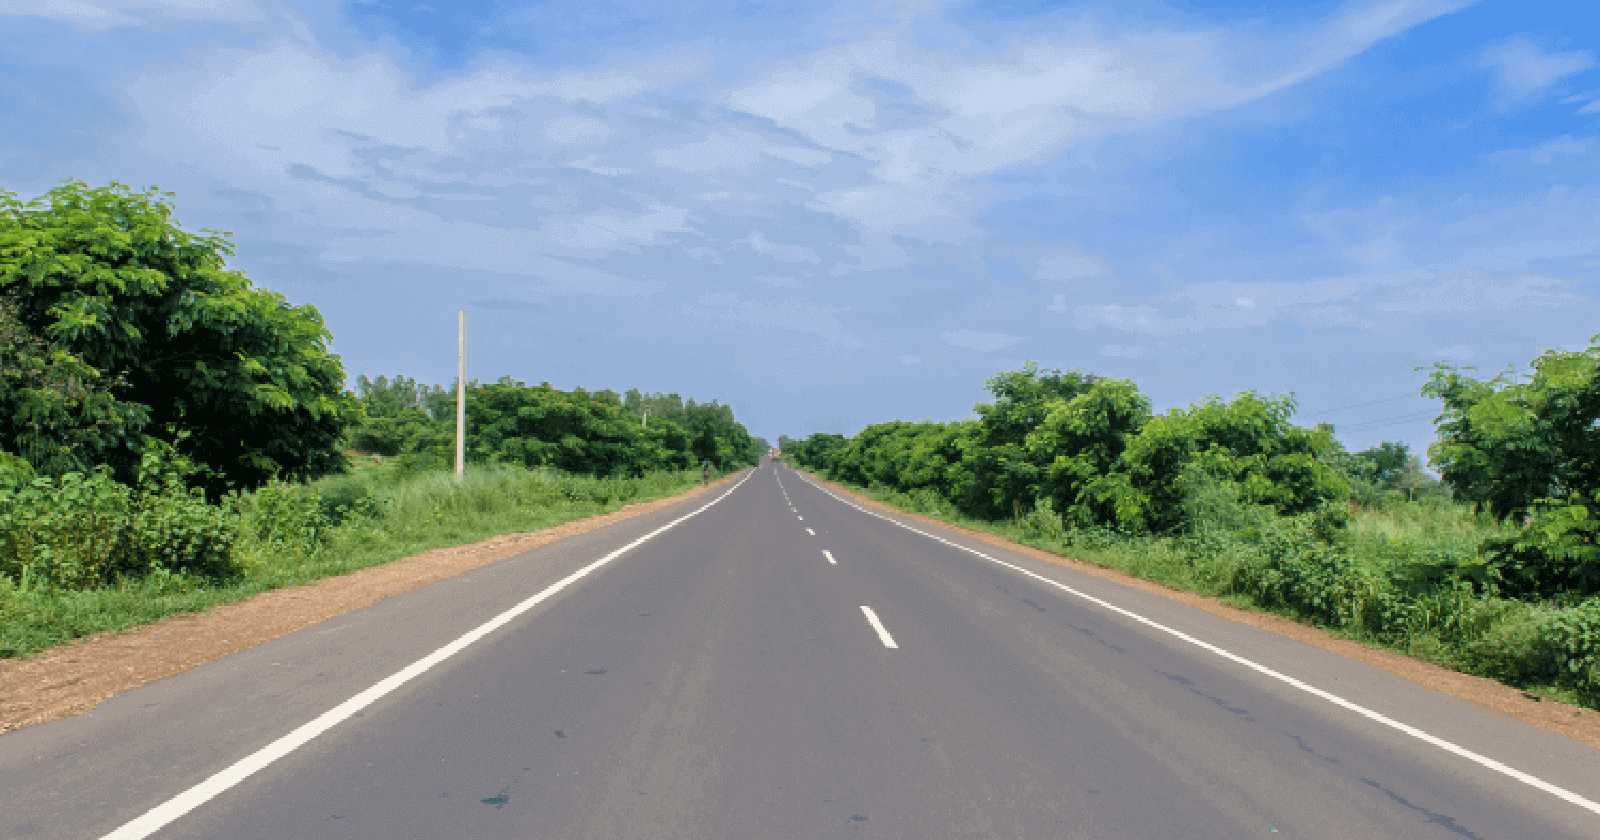 Road Tax in Pondicherry: Complete Guide on Calculation, Rates and Payment